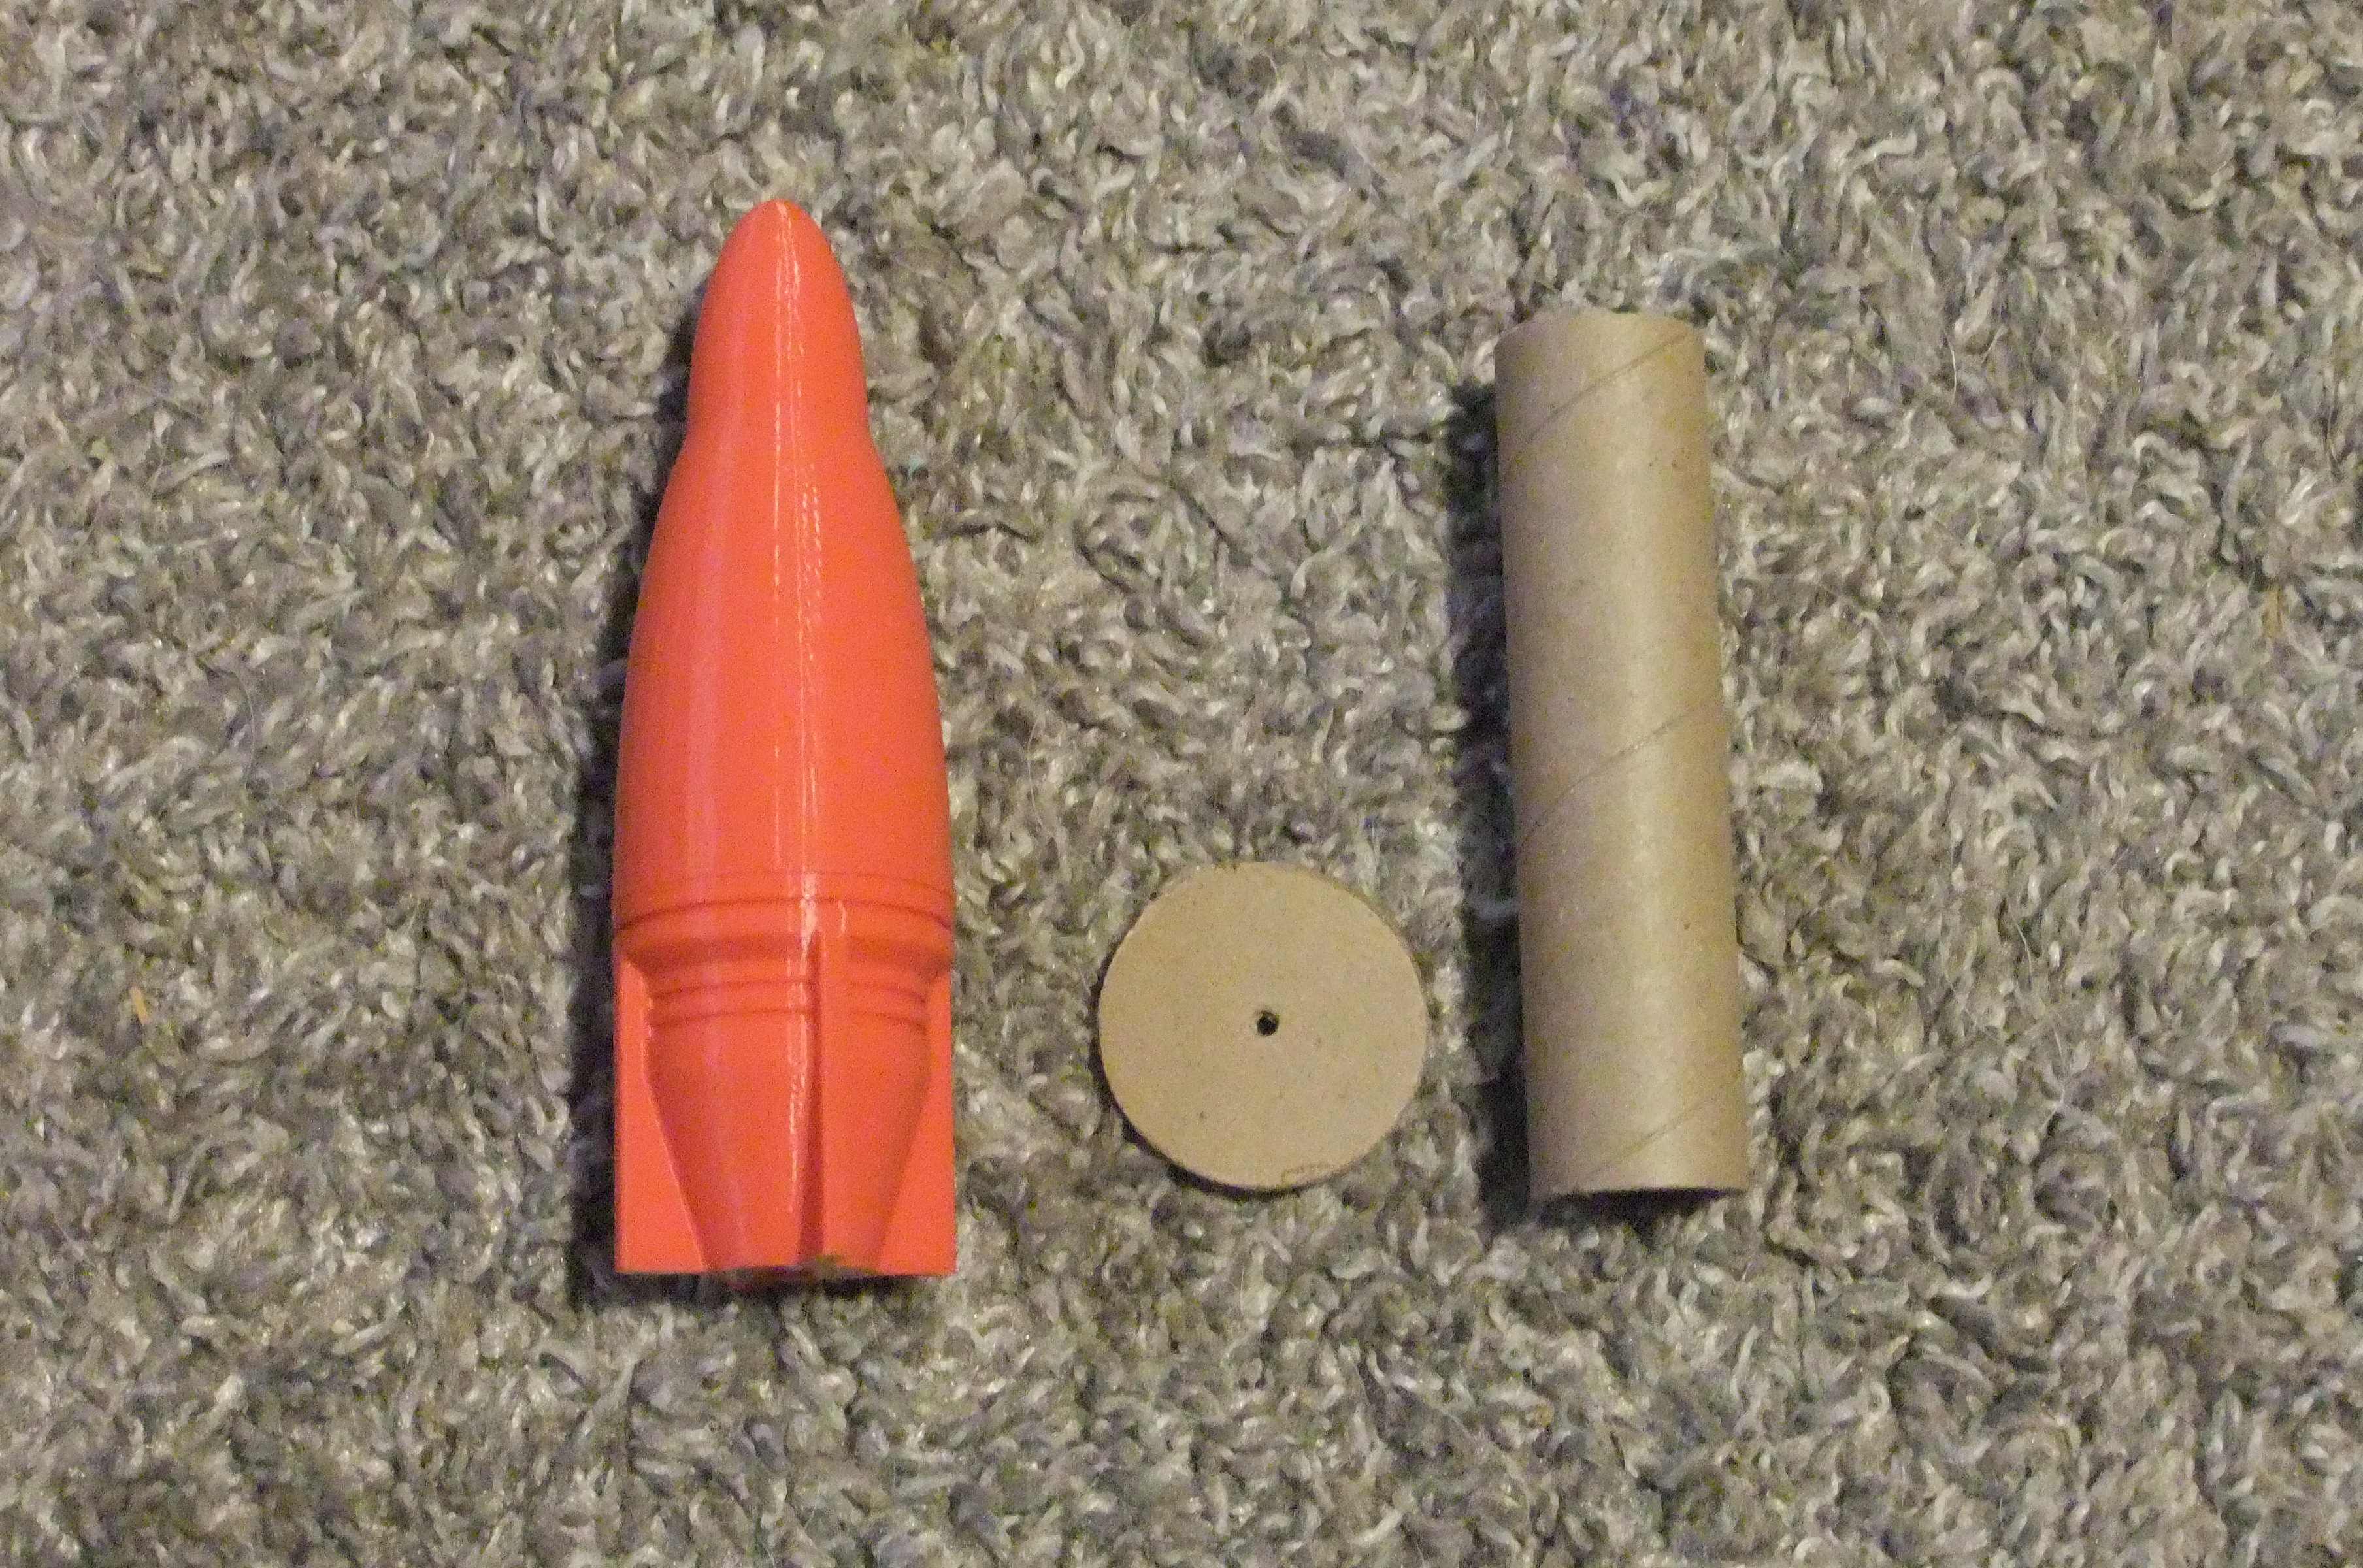 3D Printed 37mm Plastic Projectile Kit